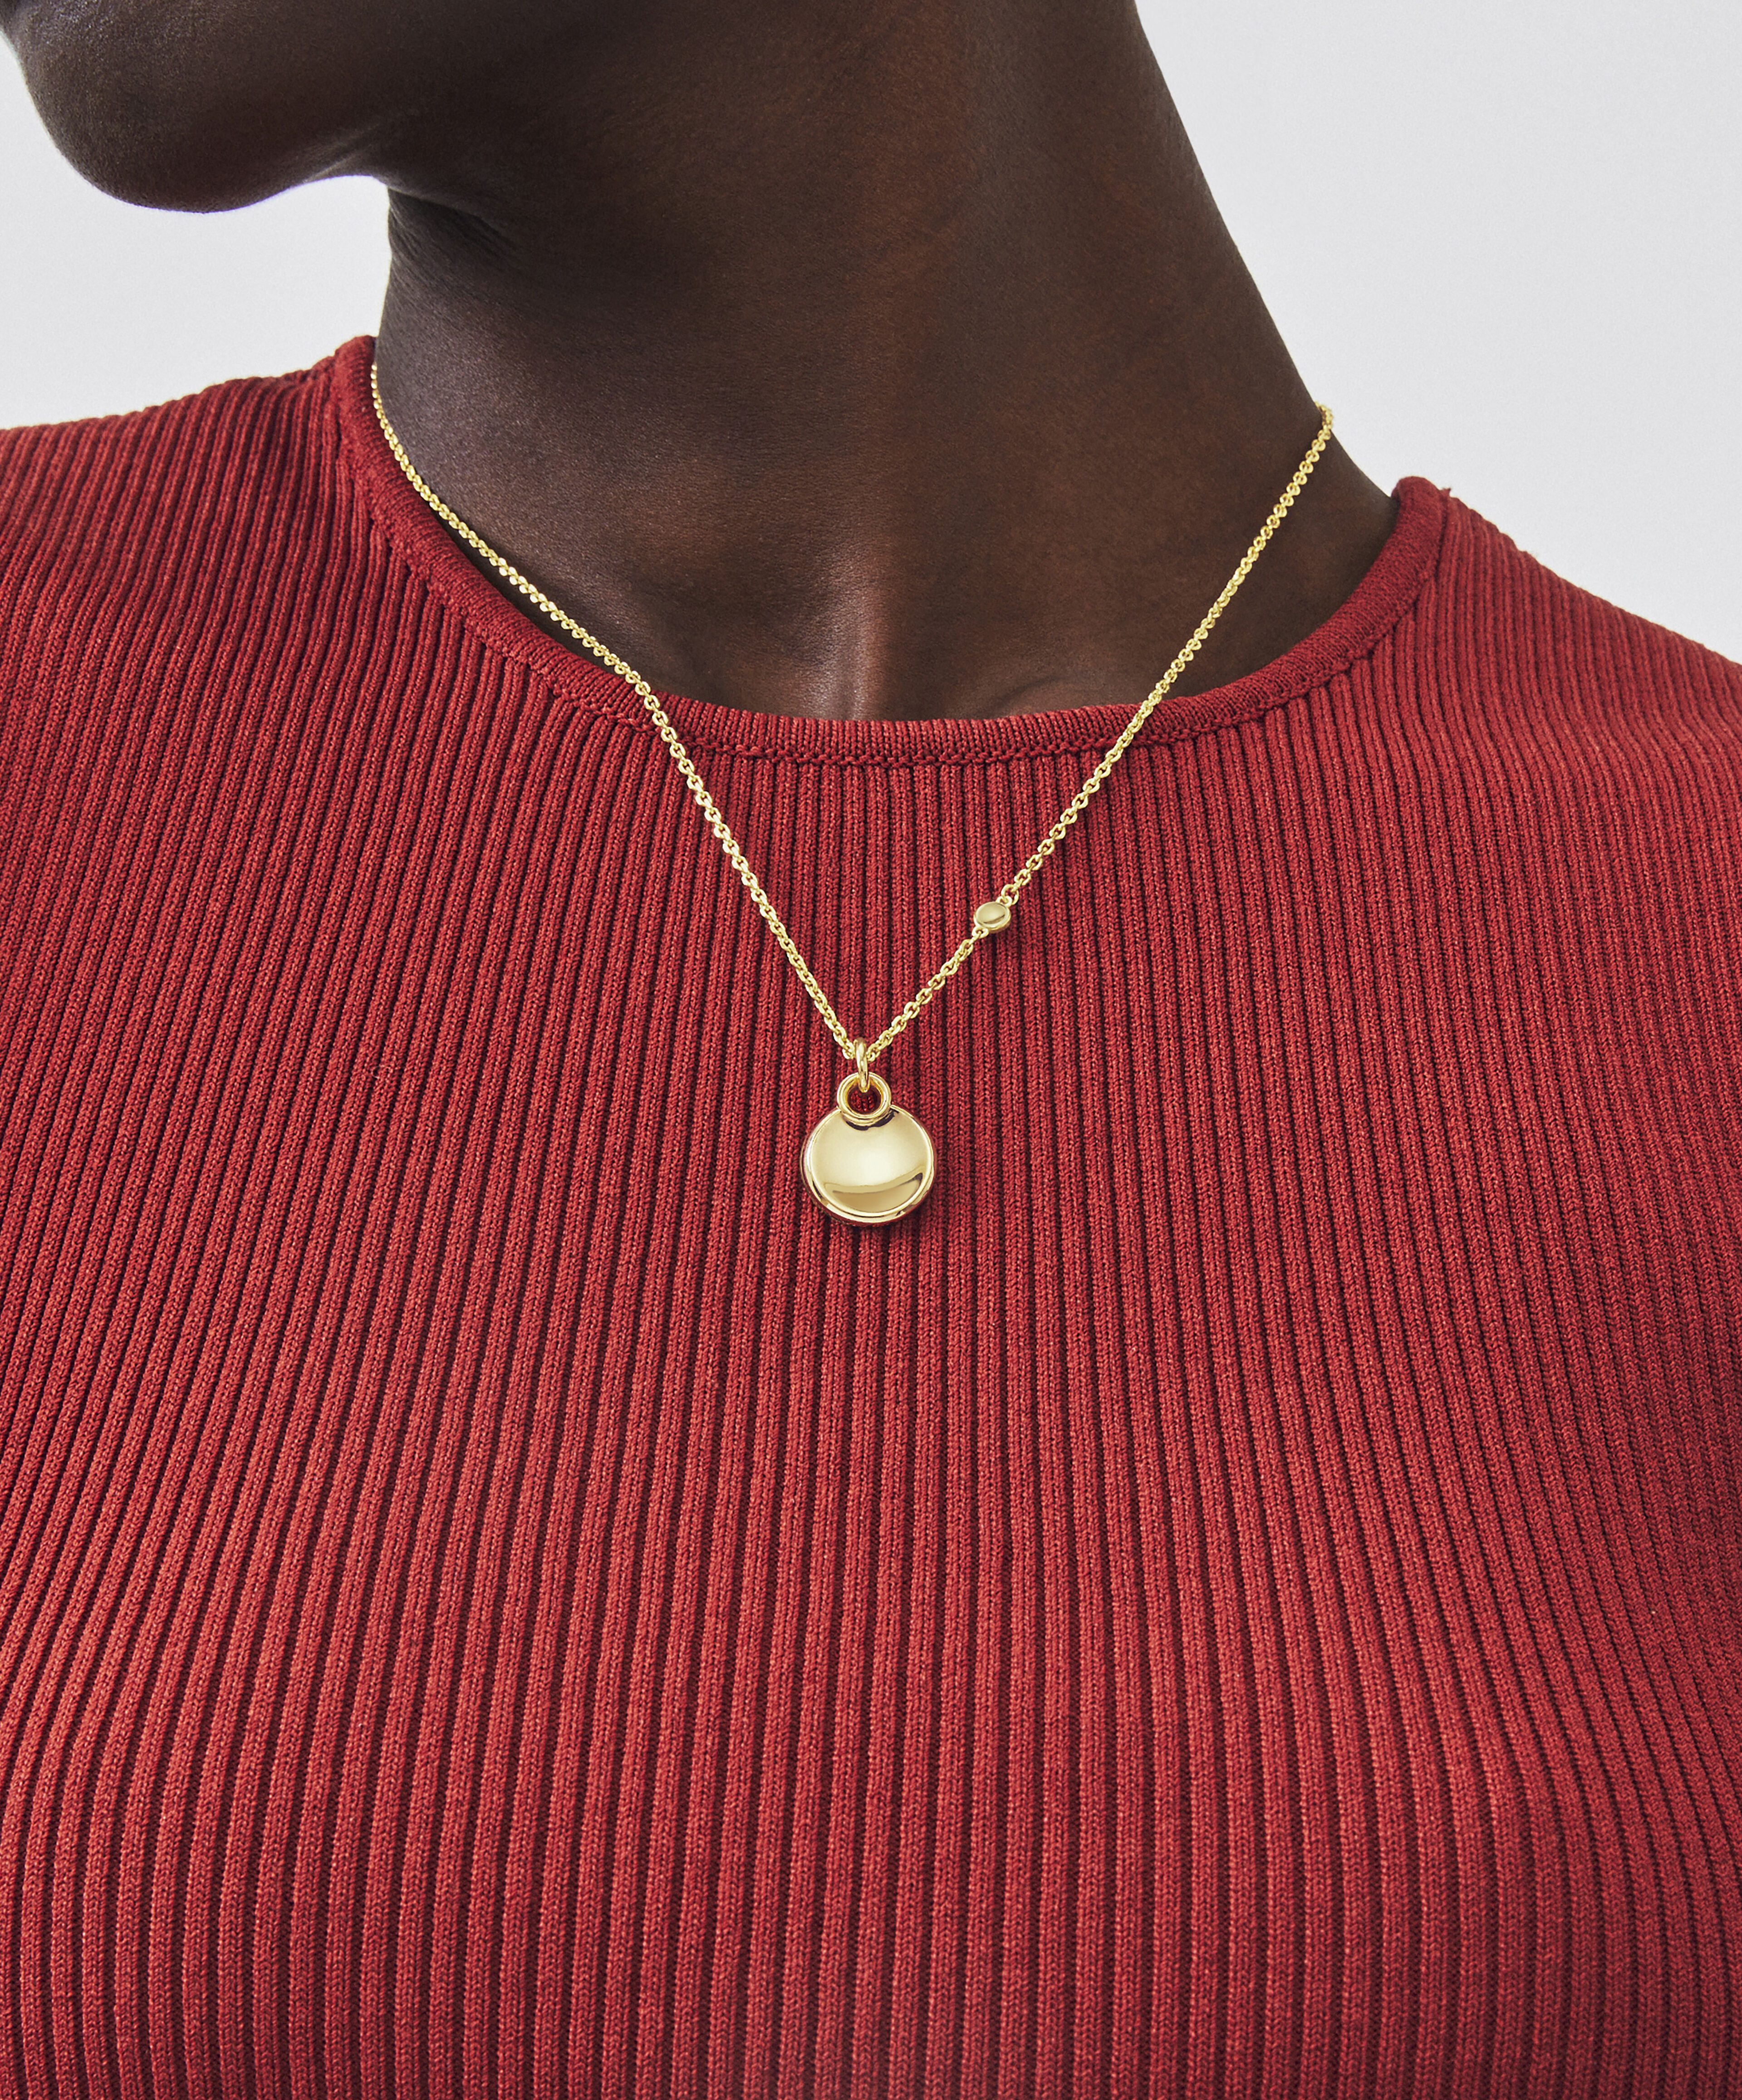 Moon & Meadow 14K Yellow Gold Disc Pendant Necklace, 17